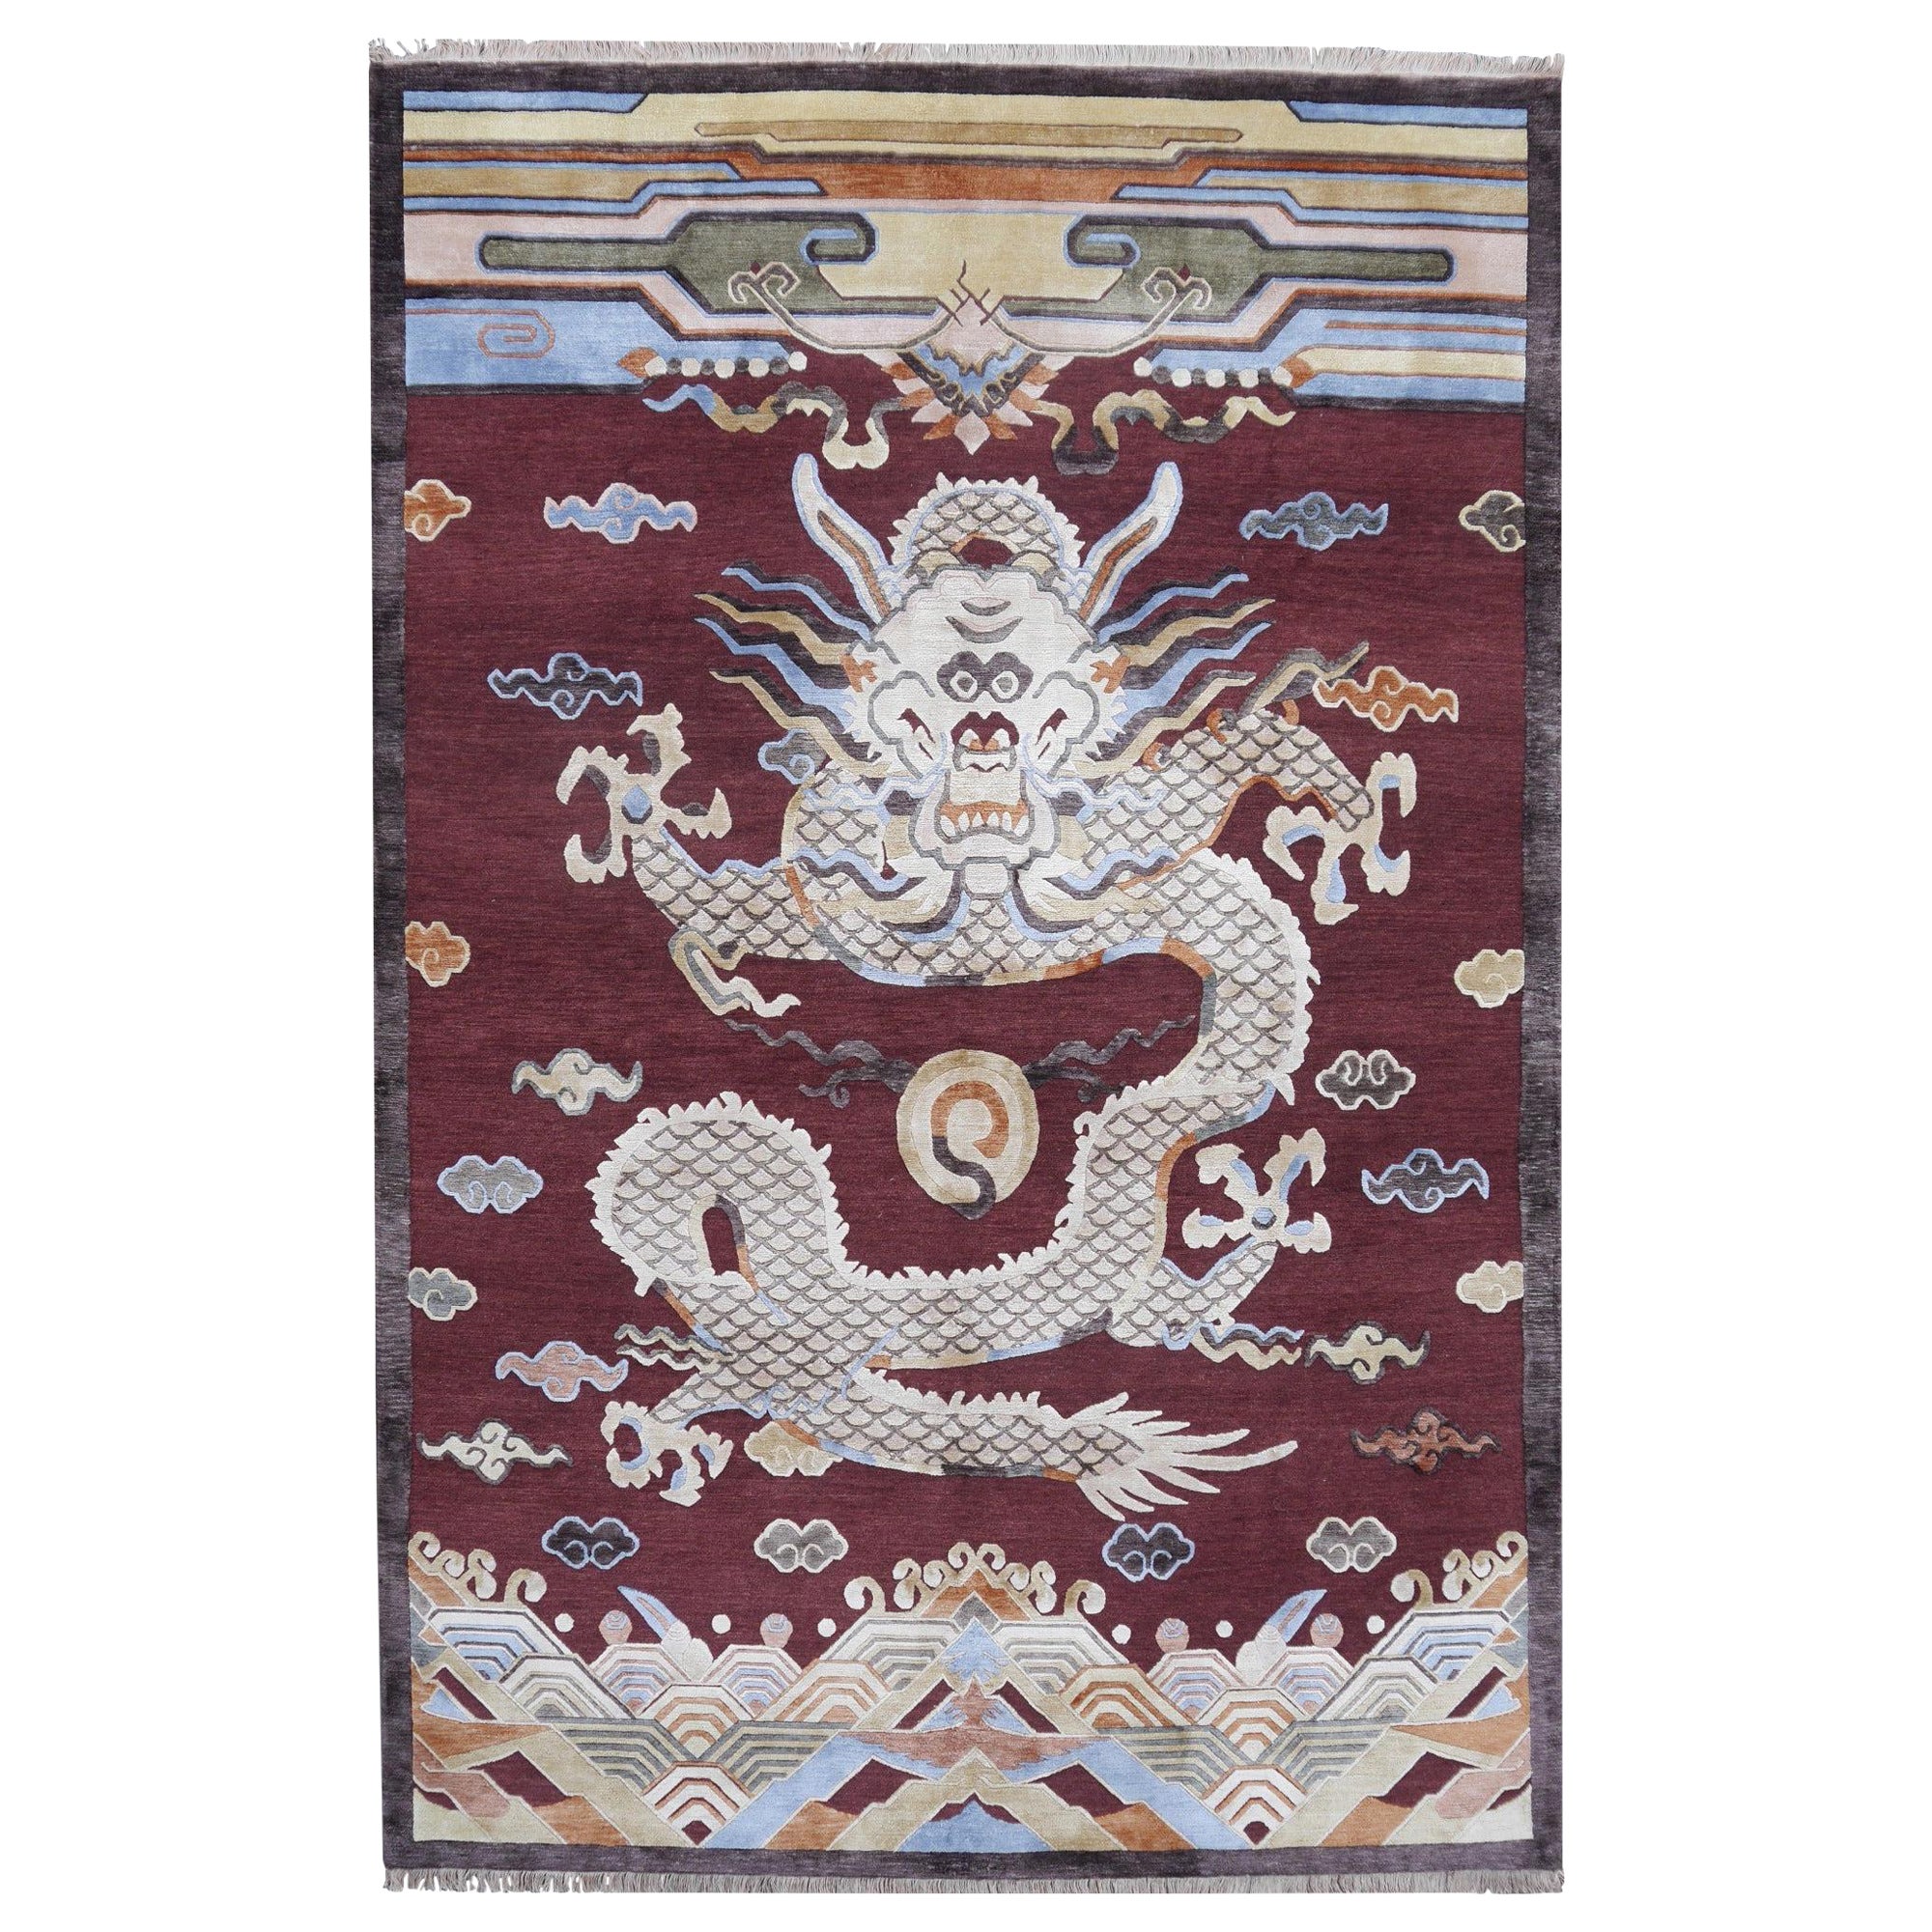 Tibetan Dragon Rug Wool Silk in Style of Imperial Chinese Kansu Design Carpets For Sale